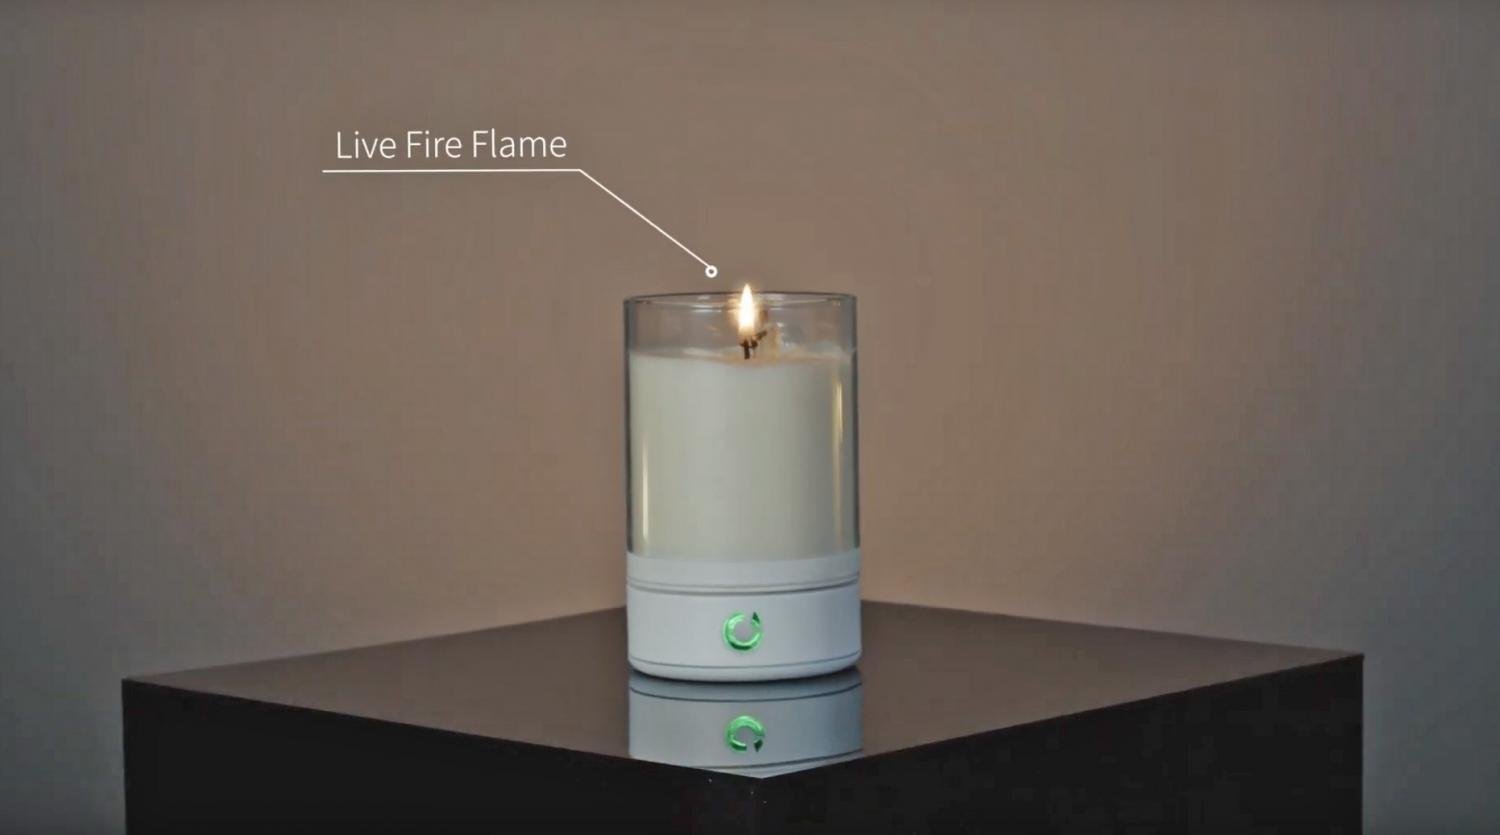 Candle Touch Smart Candle Ignites From Smart Phone - Light candle remotely from phone